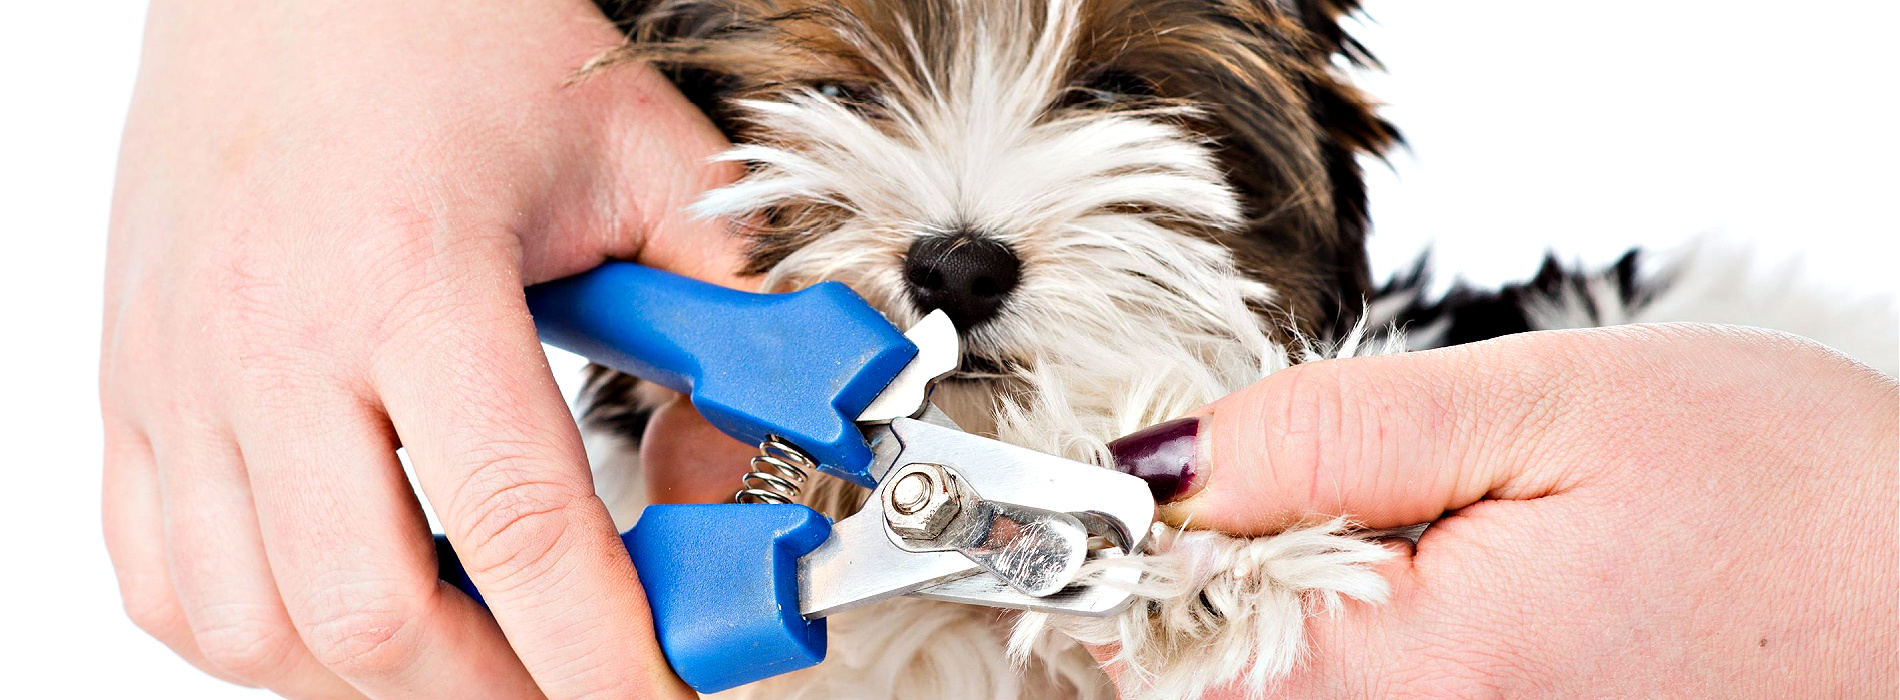 How To Trim Dog Nails Safely At Home: Step-By-Step Guide | Dutch